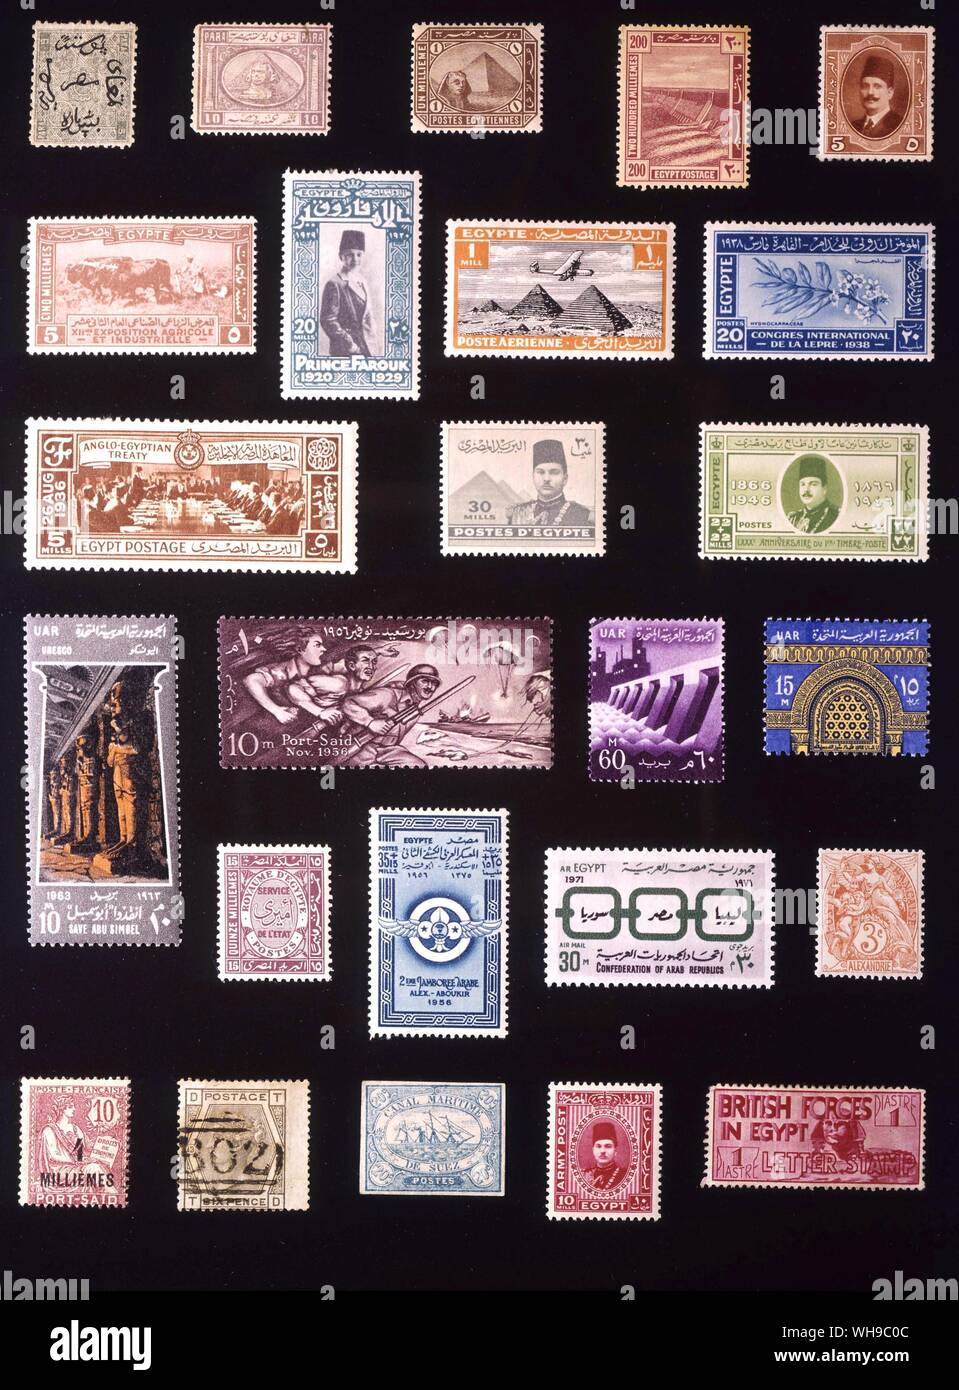 AFRICA - EGYPT: (left to right) 1. 5 paras, 1866, 2. 10 paras, 1867, 3. 1 millieme, 1888, 4. 200 milliemes, 1914, 5. 5 milliemes, 1923, 6. 5 milliemes, 1926, 7. 20 milliemes, 1929, 8. 1 millieme, 1933, 9. 20 milliemes, 1938, 10. 5 milliemes, 1936, 11. 30 milliemes, 1939, 12. 22 + 22 milliemes, 1946, 13. 10 milliemes, 1963, 14. 10 milliemes, 1956, 15. 60 milliemes, 1960, 16. 15 milliemes, 1964, 17. 15 milliemes, 1934, 18. 35 + 15 milliemes, 1956, 19. Egyptian Arab Republic, 30 milliemes, 1971, 20. French post Office in Alexandria, 3 centimes, 1902, 21. French Post Office in port Said, 4 Stock Photo